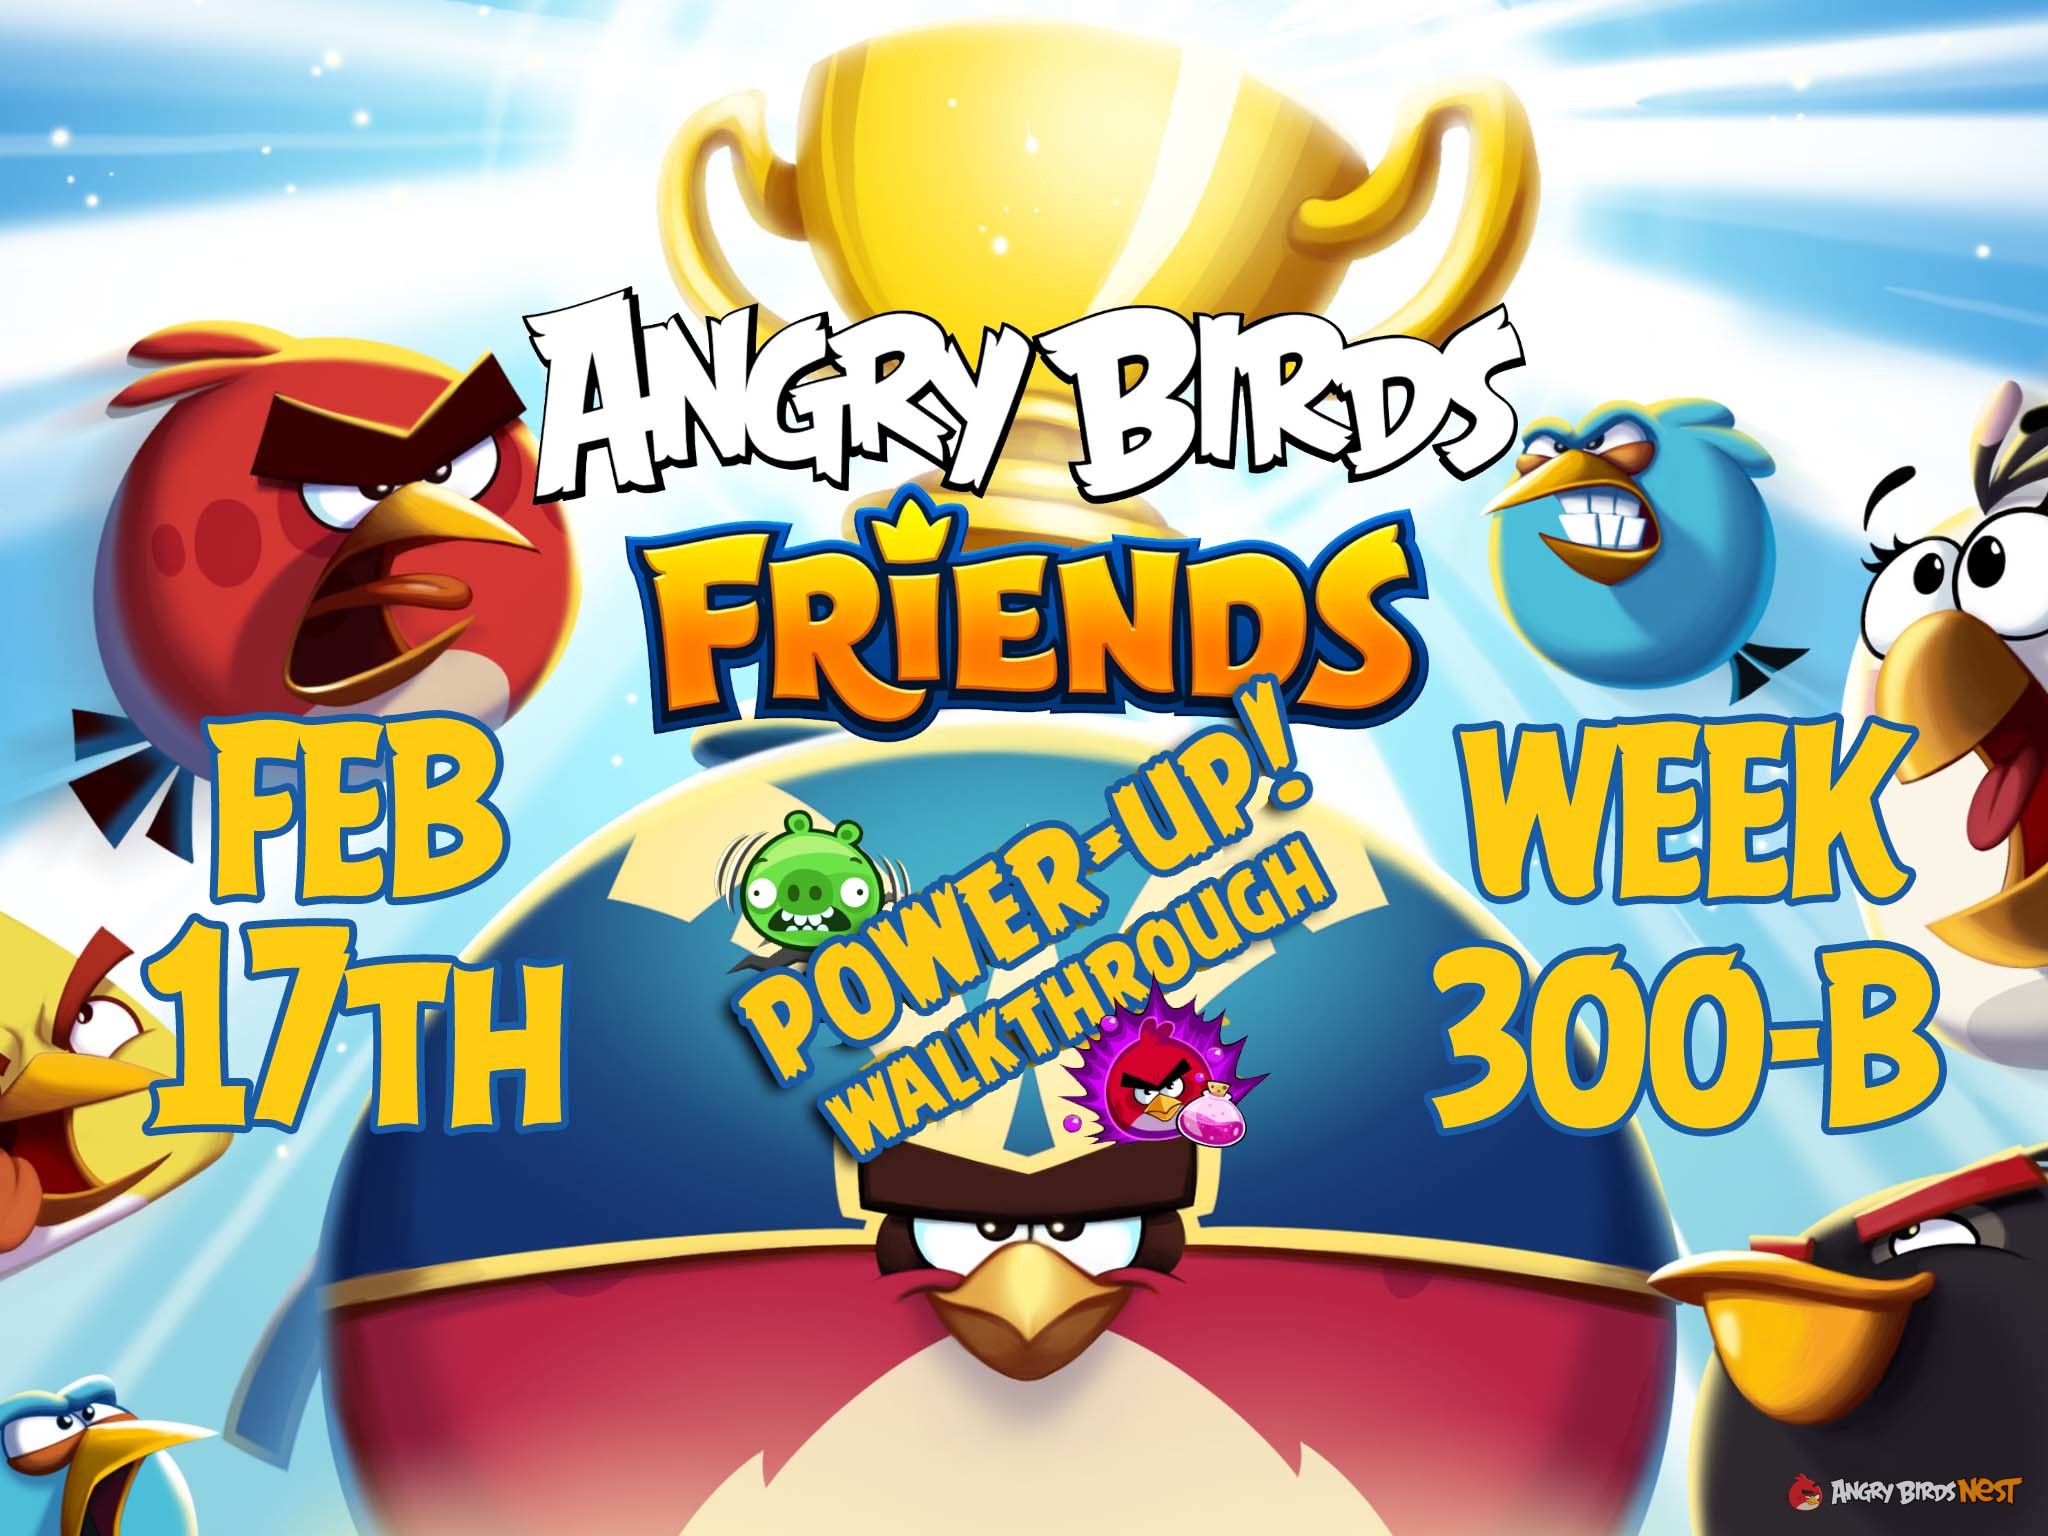 Angry Birds Friends Tournament Week 300-B Feature Image PU